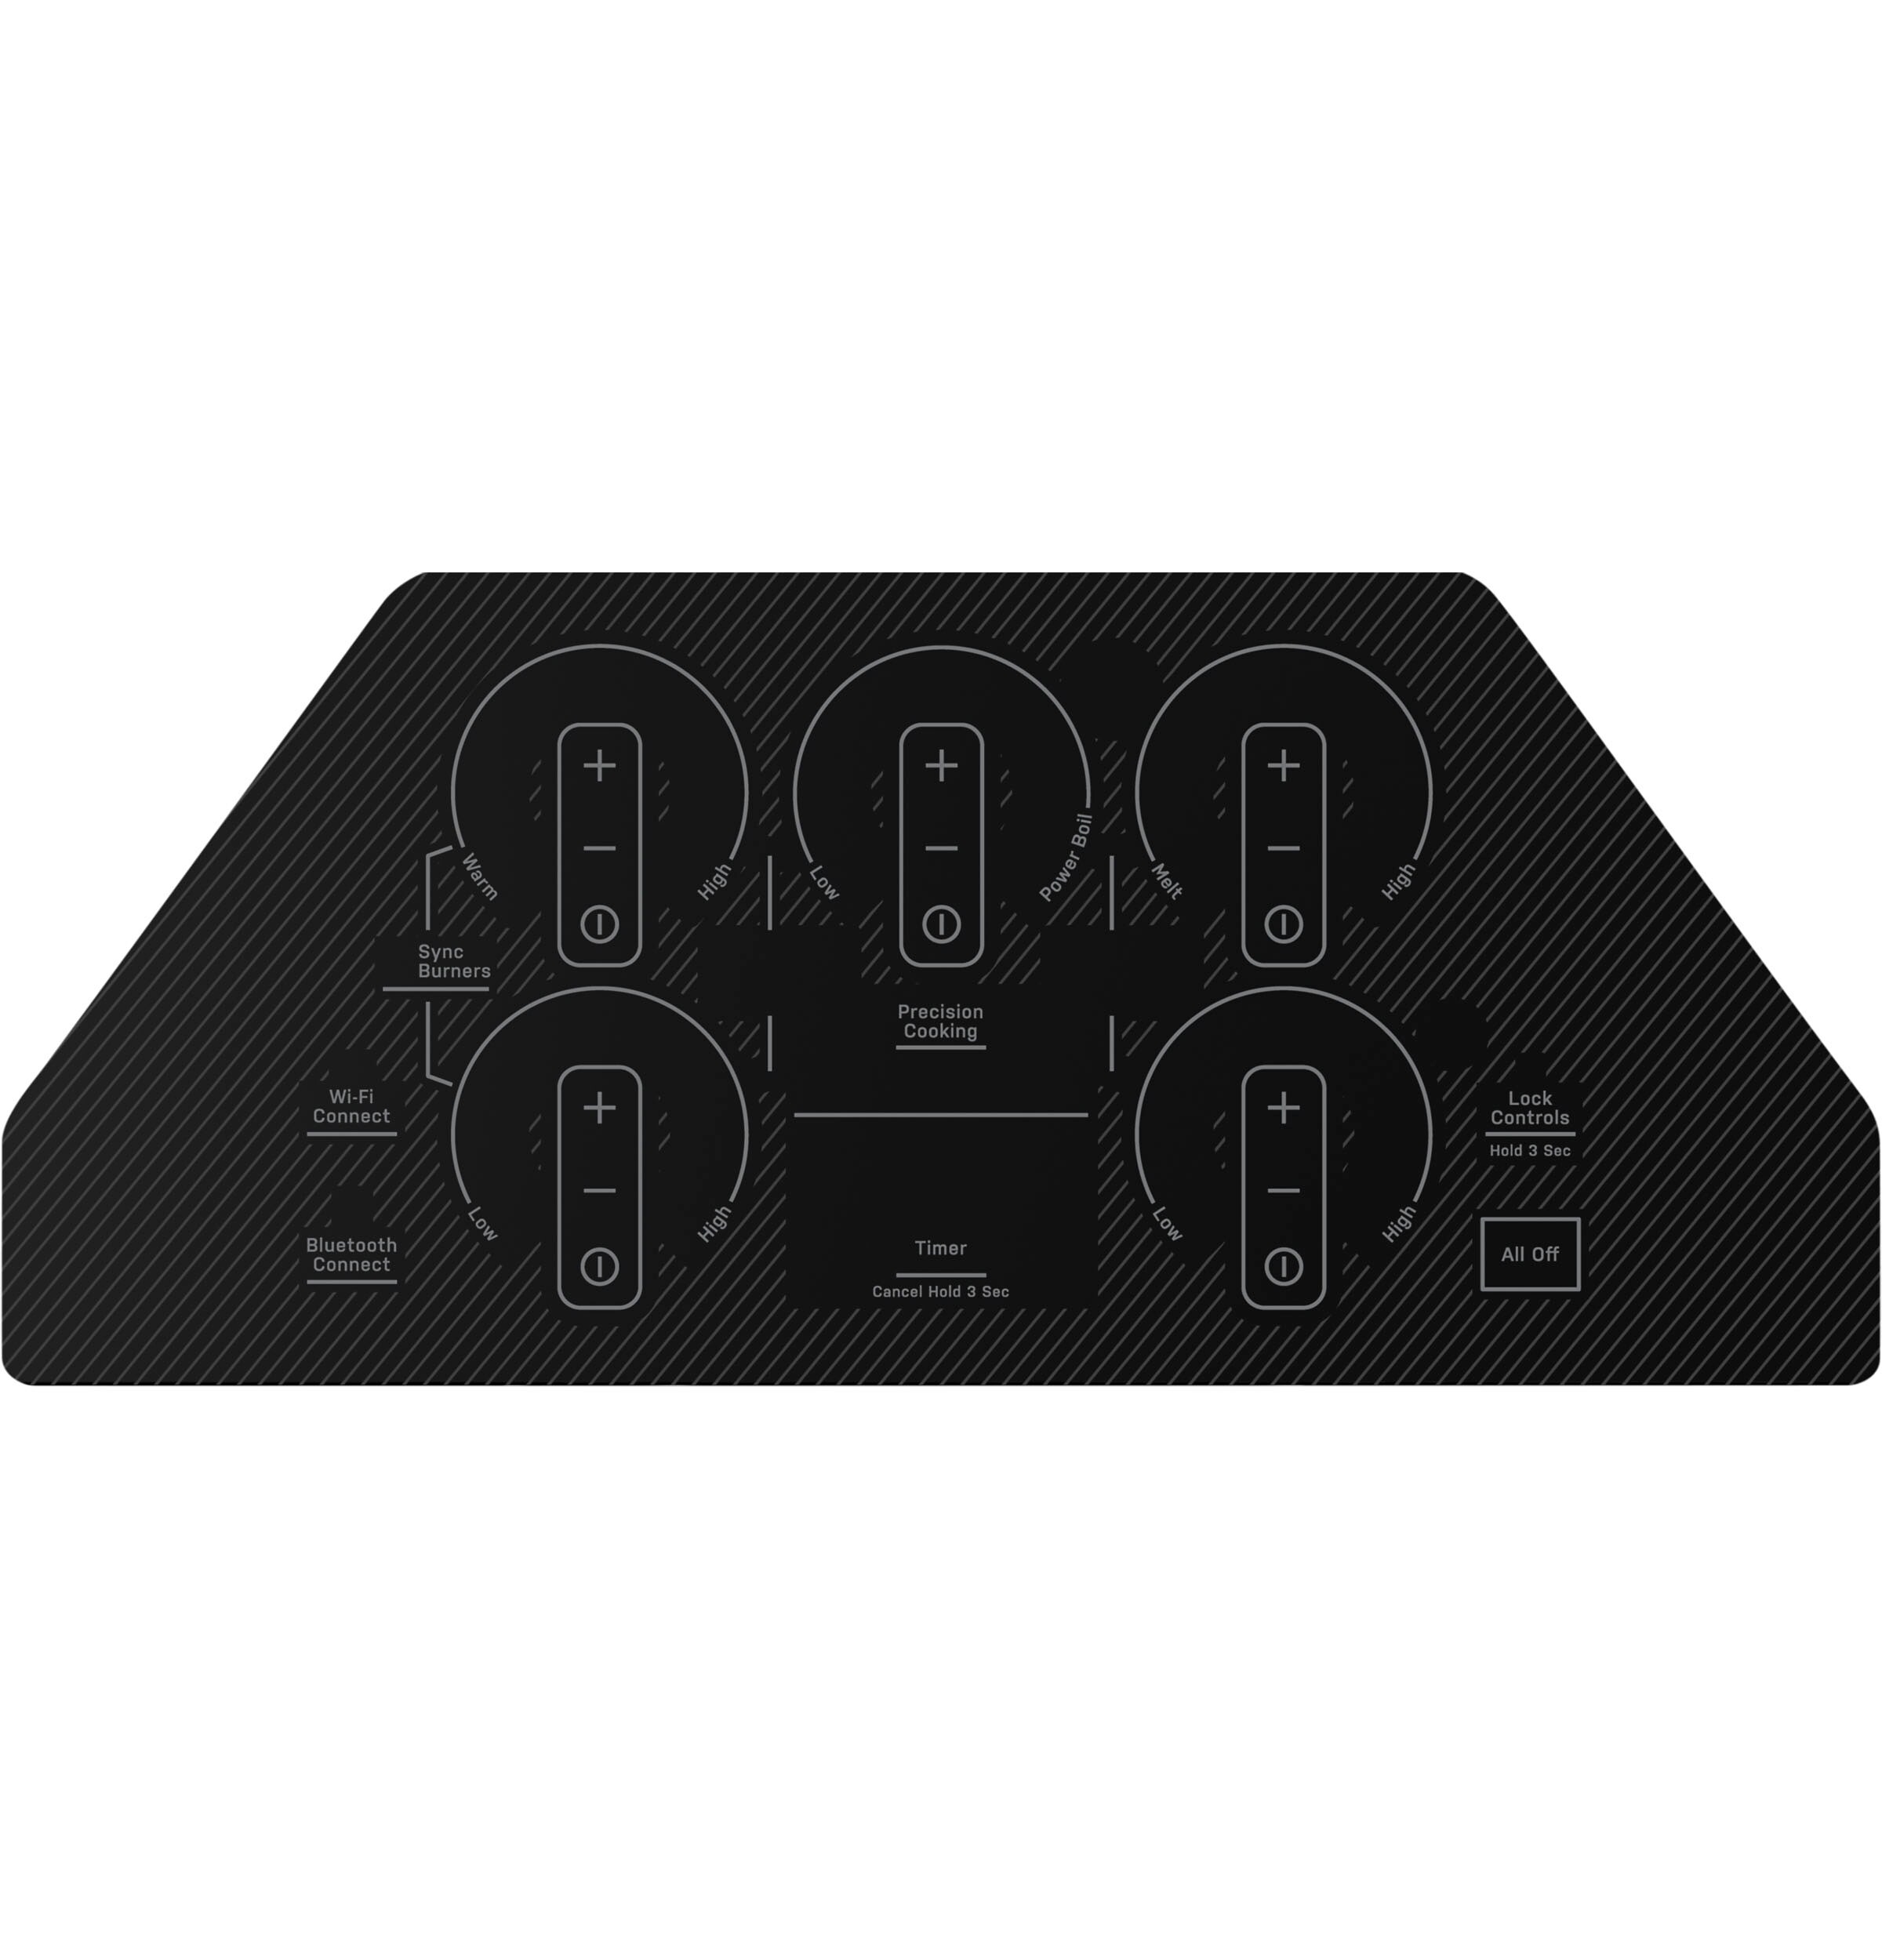 GE Profile 30 in. Smart Radiant Electric Cooktop in Black with 5 Elements  PEP9030DTBB - The Home Depot